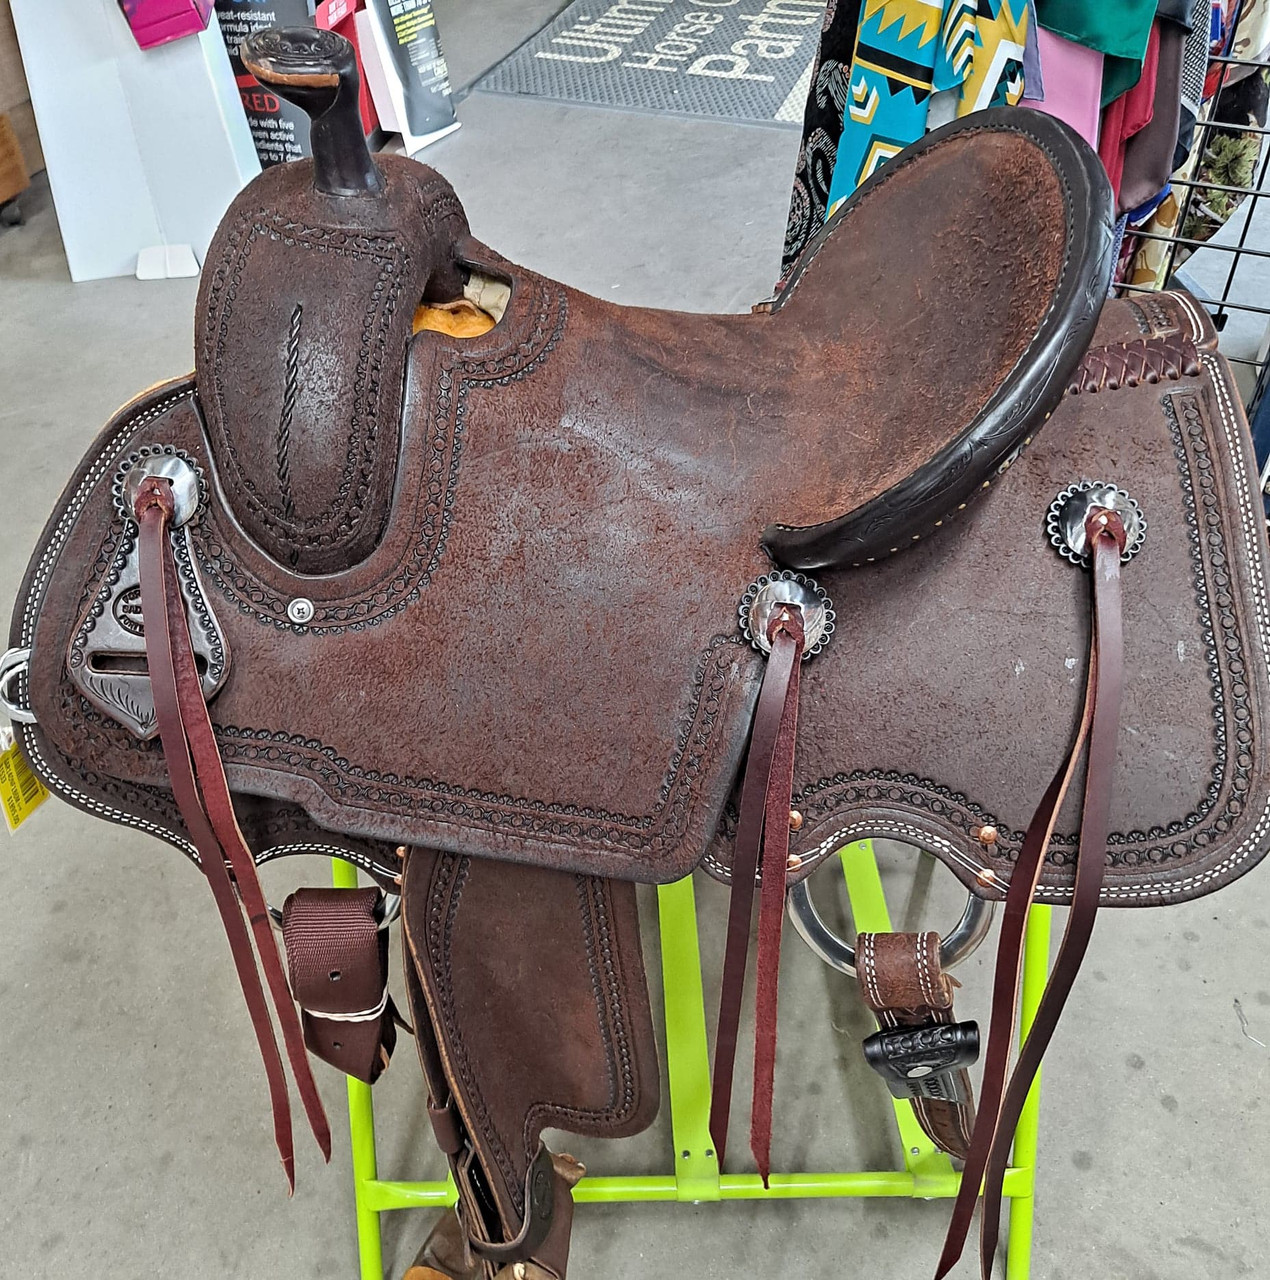 New All Around Saddle by Fort Worth Saddle Co with 14 inch seat. Chocolate roughout Hermann Oak leather. Secure pencil roll seat. 6 strings. Gullet size is 8 inch, weight is 30lbs, and skirt is 26 inch. Made in USA. Limited lifetime warranty.

S1533